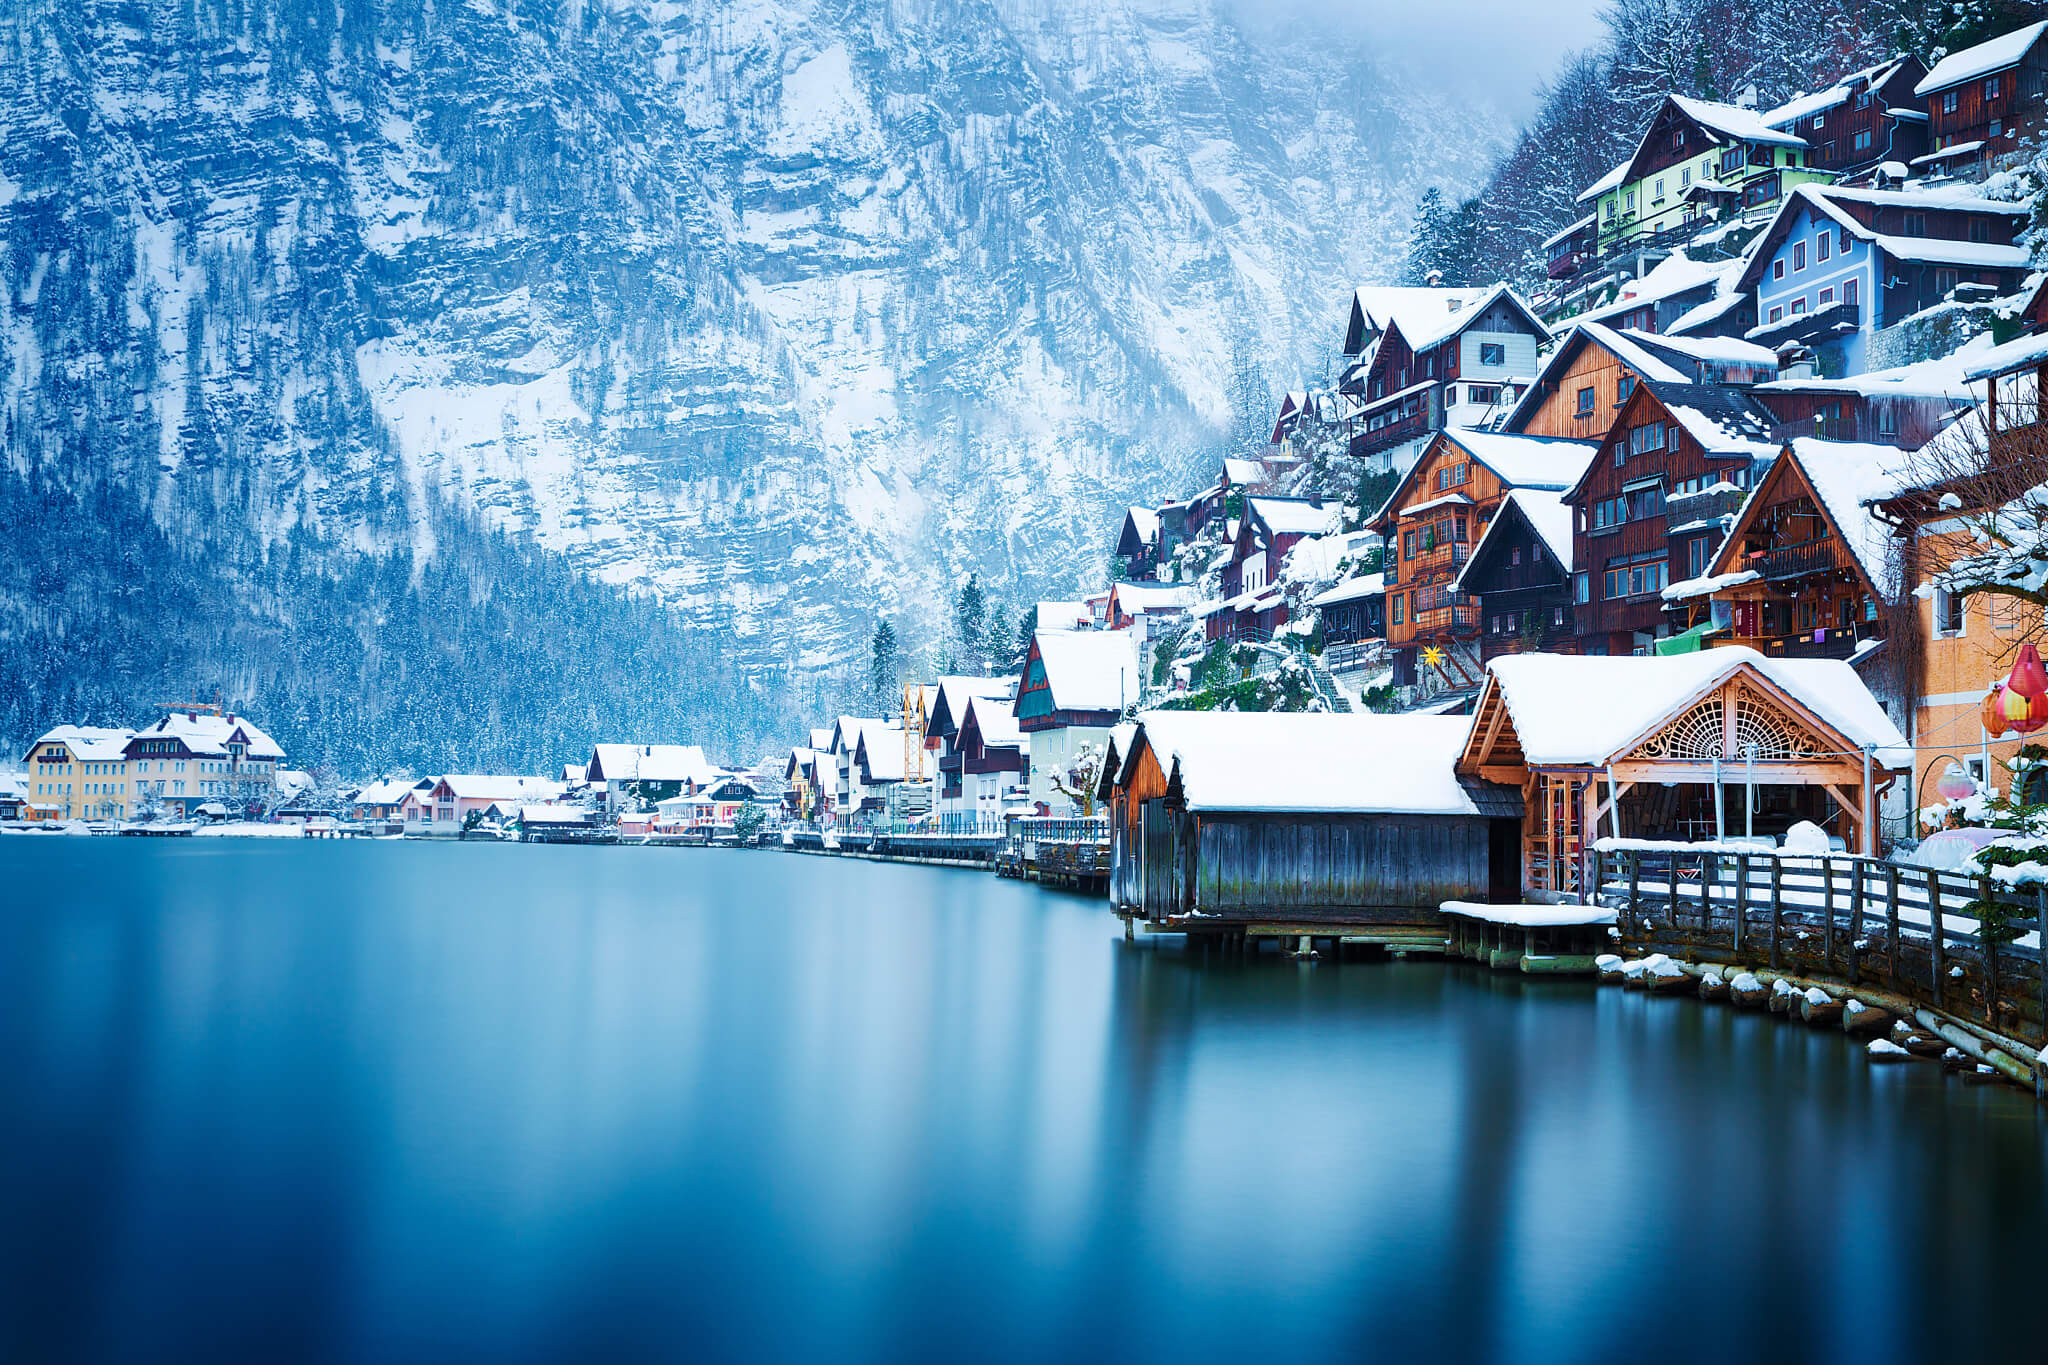 Winter Austria Holiday Travel & Tour Package